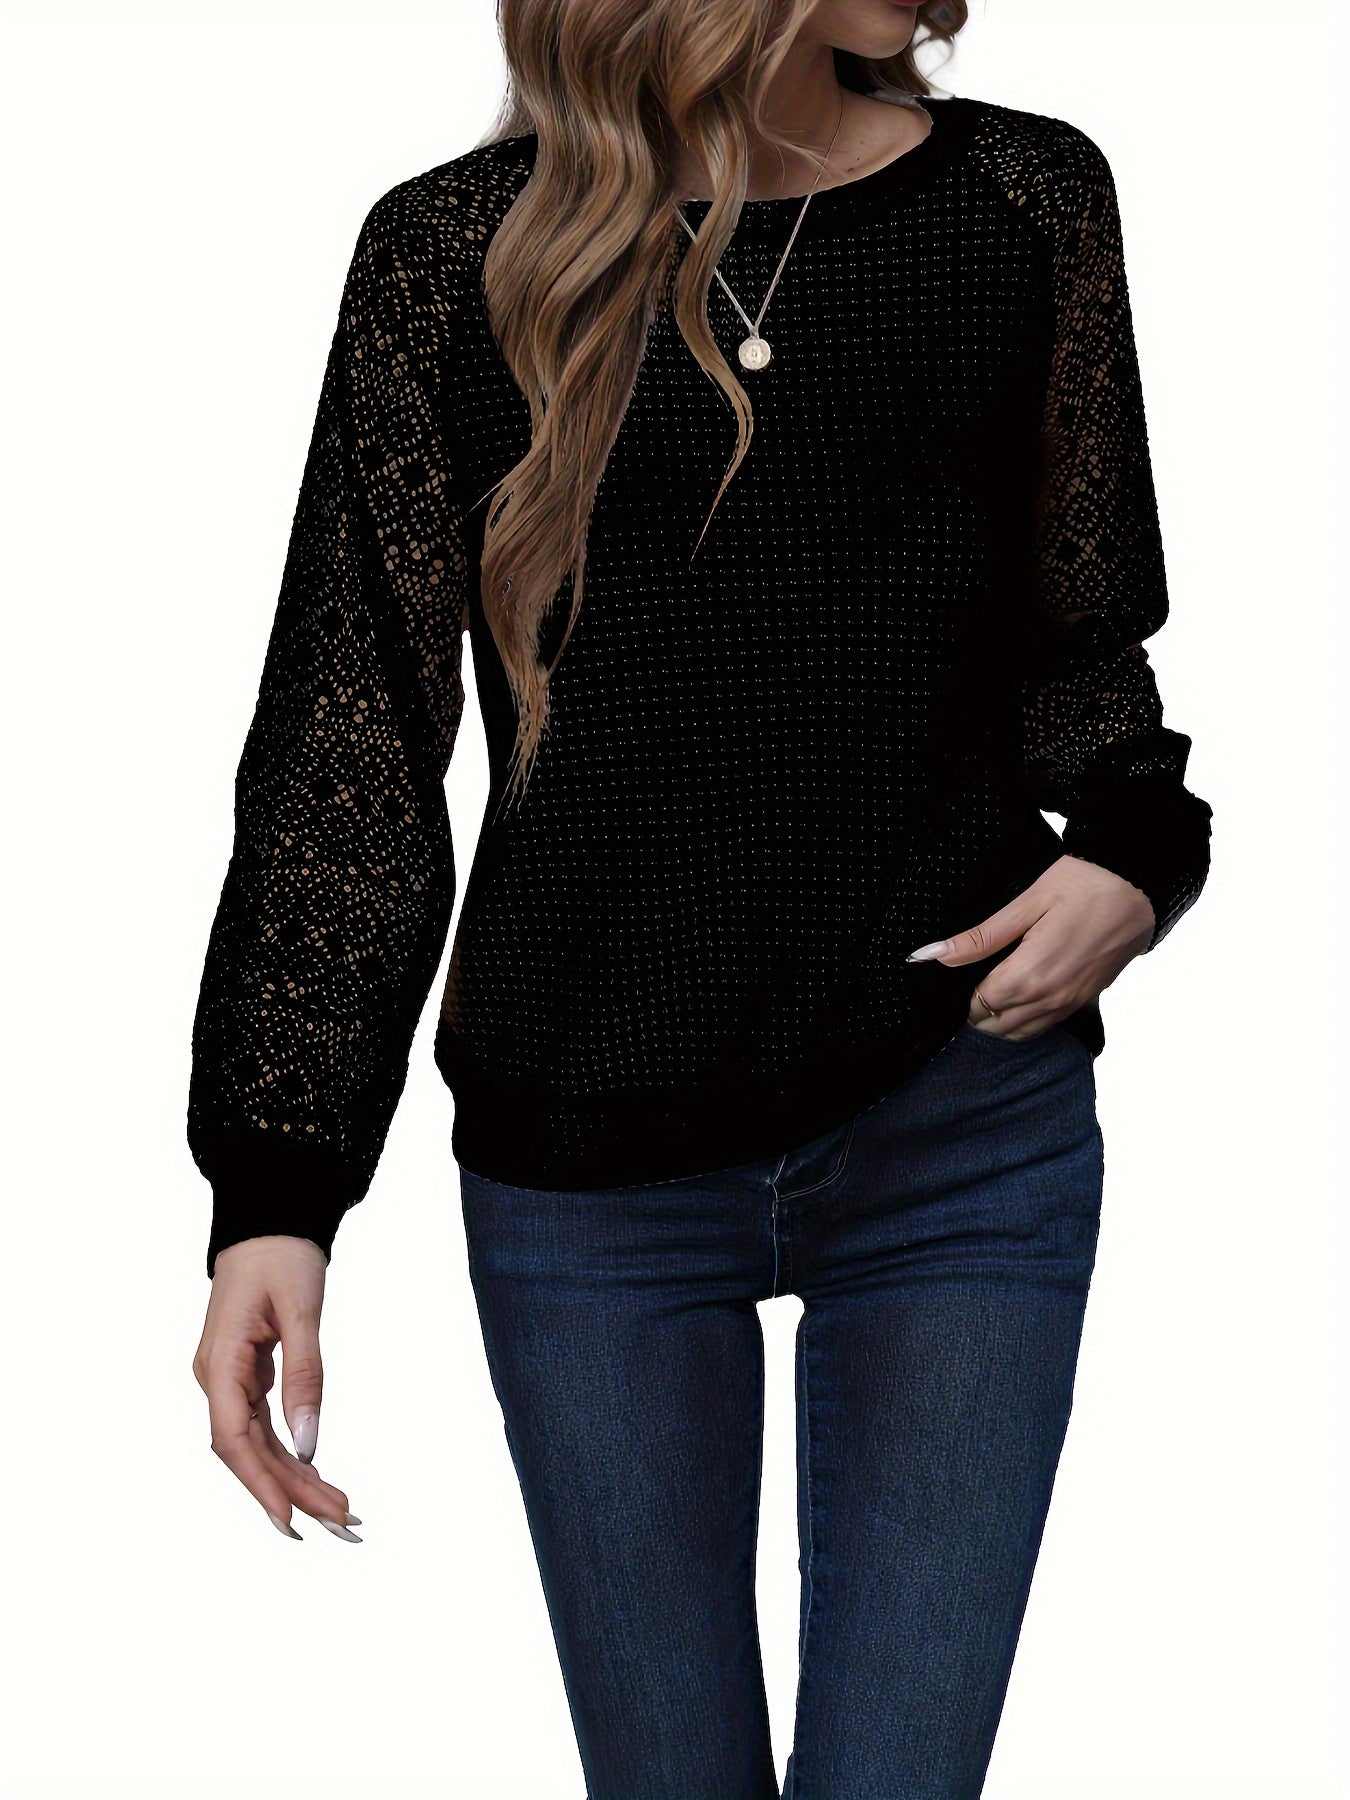 Eyelet Lace Stitching Crew Neck Knit Top, Elegant Long Sleeve Sweater For Spring & Fall, Women's Clothing